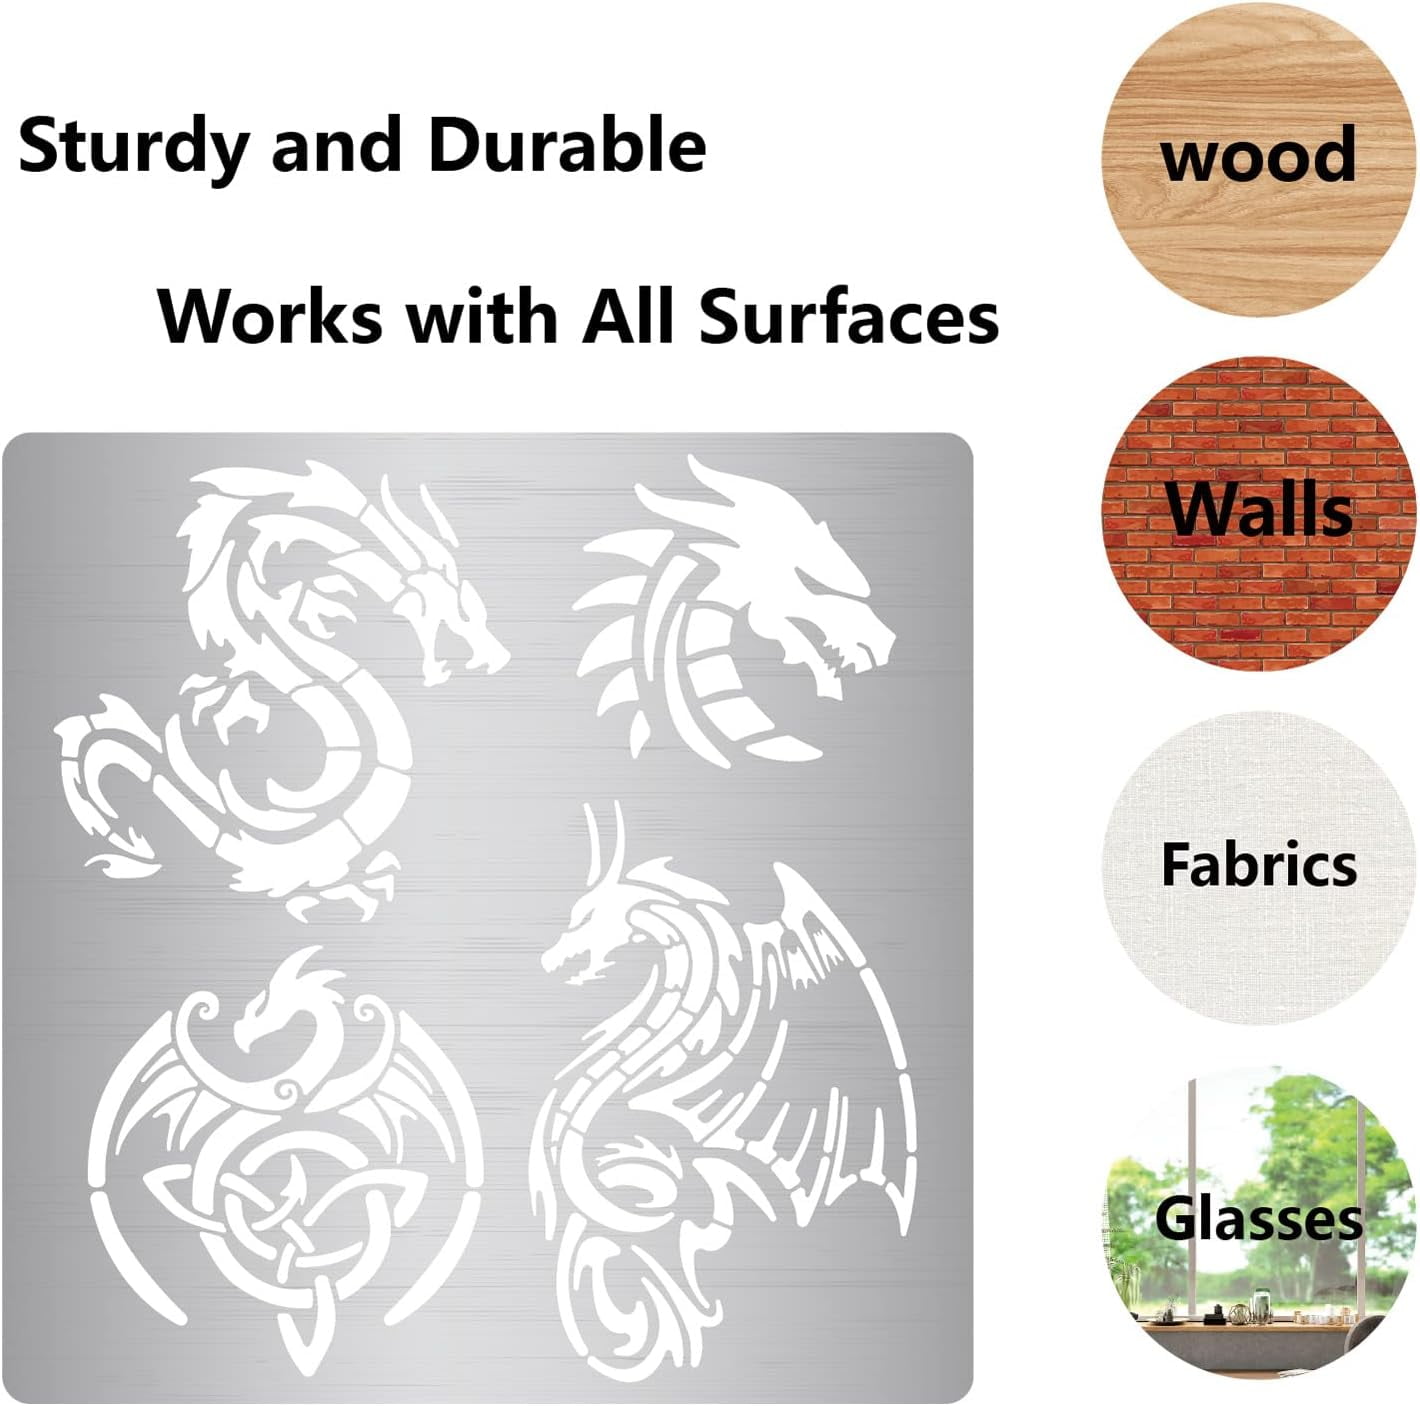  Alinacutle Two Dragons Metal Stencils,Wood Burning Stencils,Stainless  Steel Stencils Kit,Templates Tool for Wood Carving,Engraving and  Scrapbooking Project,Painting,1PC : Arts, Crafts & Sewing